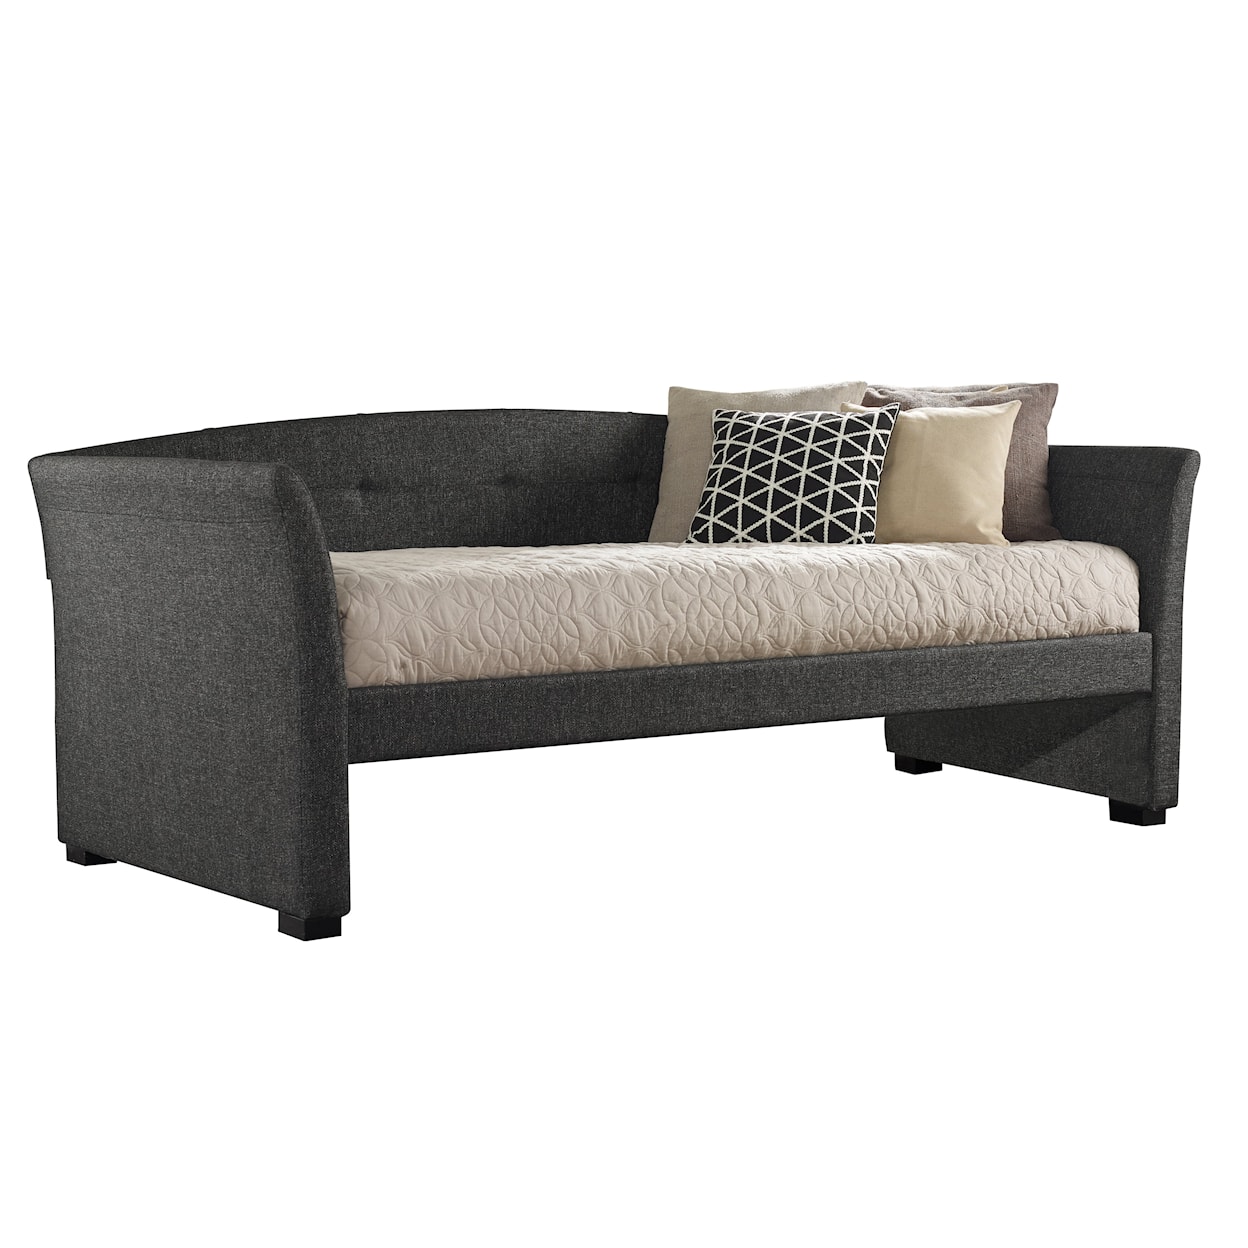 Hillsdale Morgan 2411db Morgan Upholstered Twin Daybed Mueller Furniture Bed Headboard 